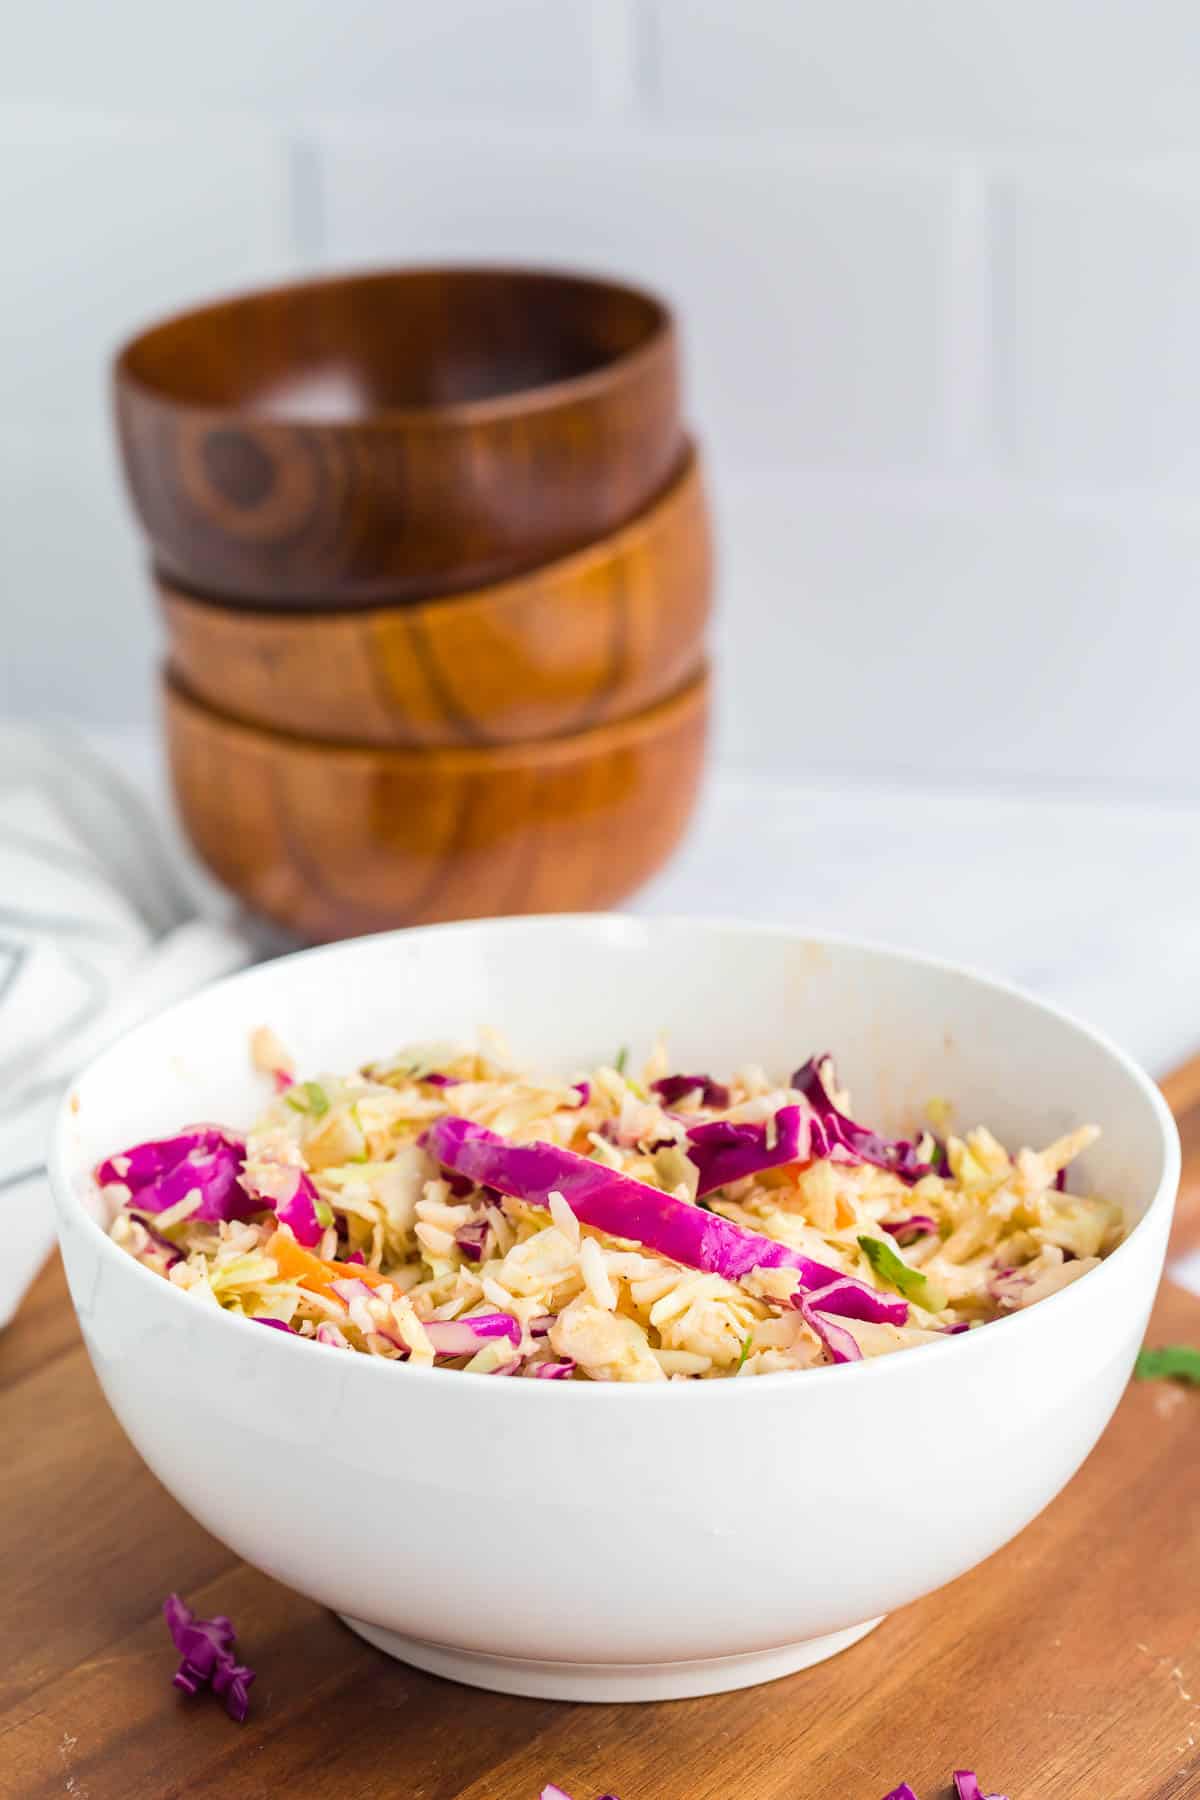 coleslaw salad in a white bowl with wooden bowls stacked in the background